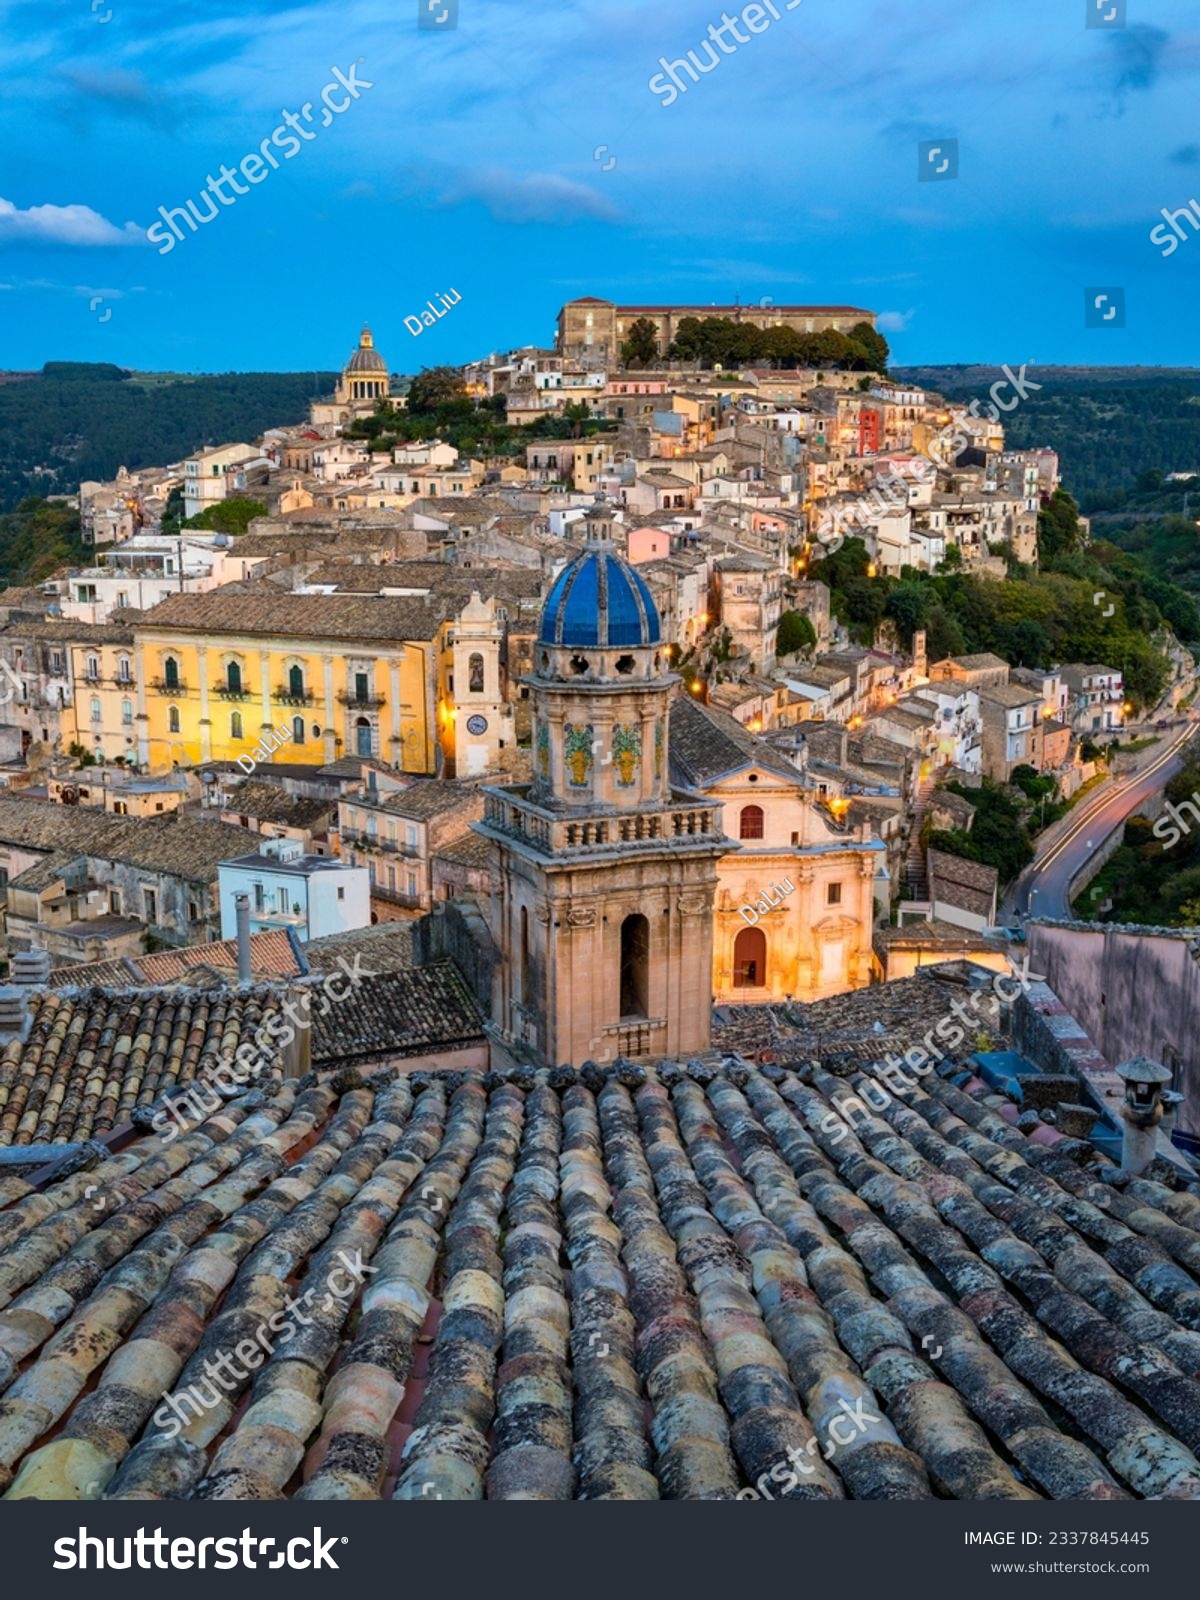 View of Ragusa (Ragusa Ibla), UNESCO heritage town on Italian island of Sicily. View of the city in Ragusa Ibla, Province of Ragusa, Val di Noto, Sicily, Italy.  #2337845445